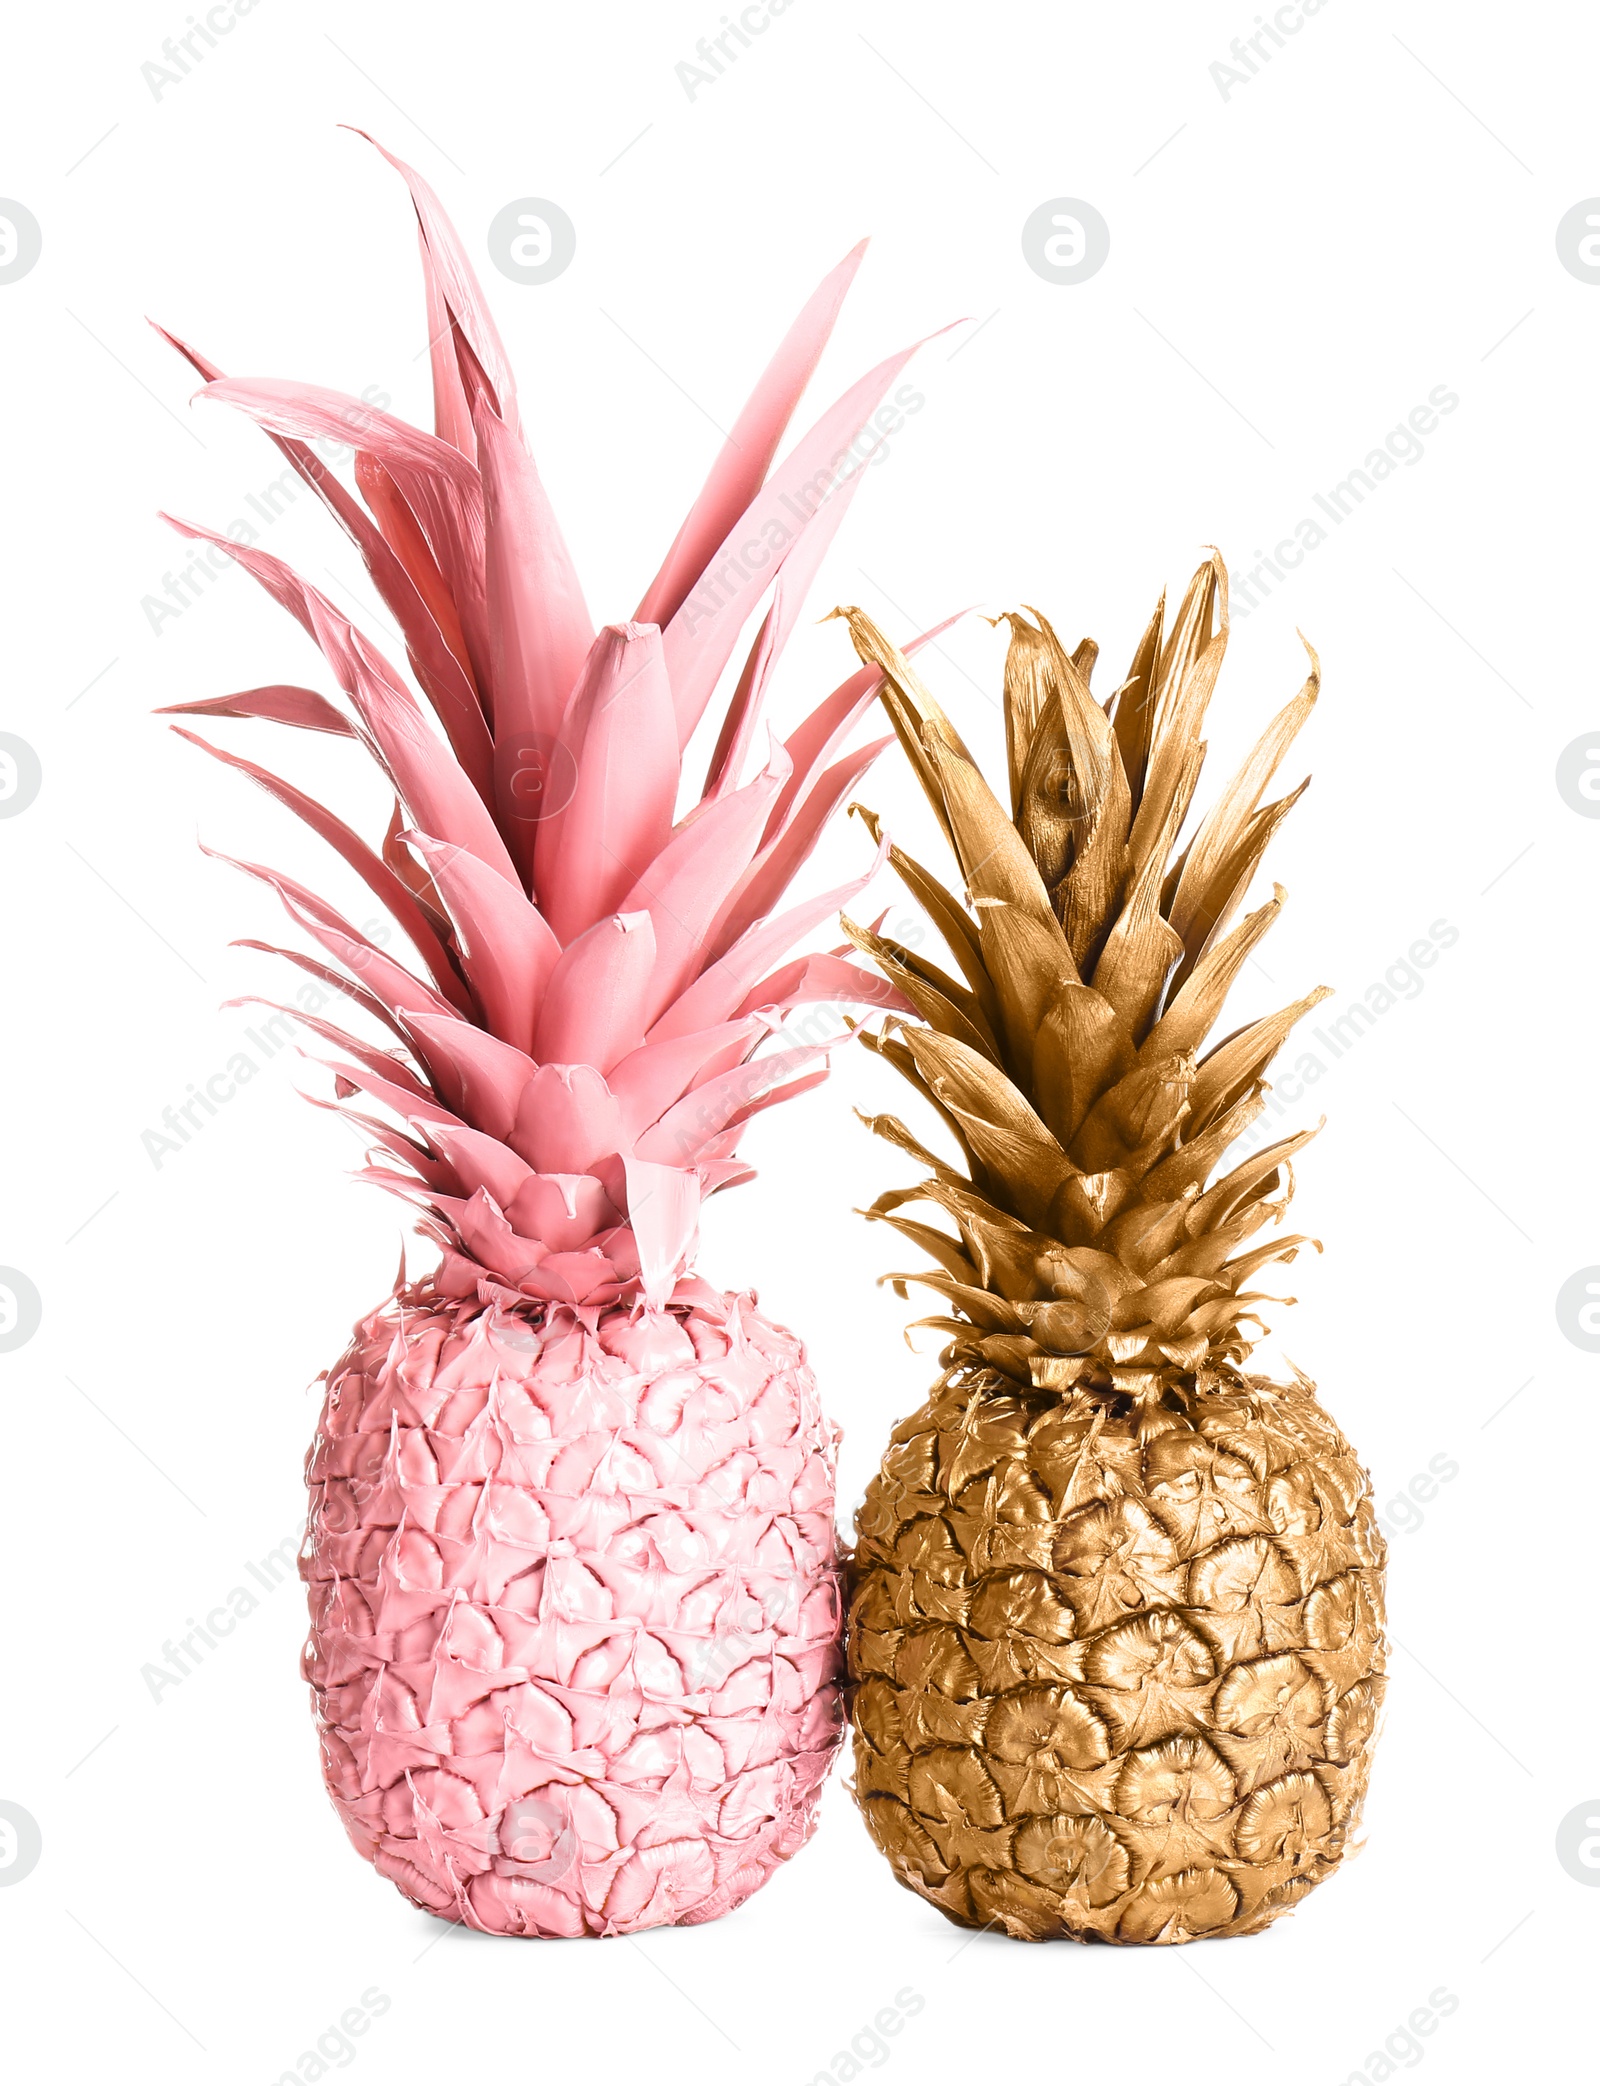 Photo of Gold and pink painted fresh pineapples on white background